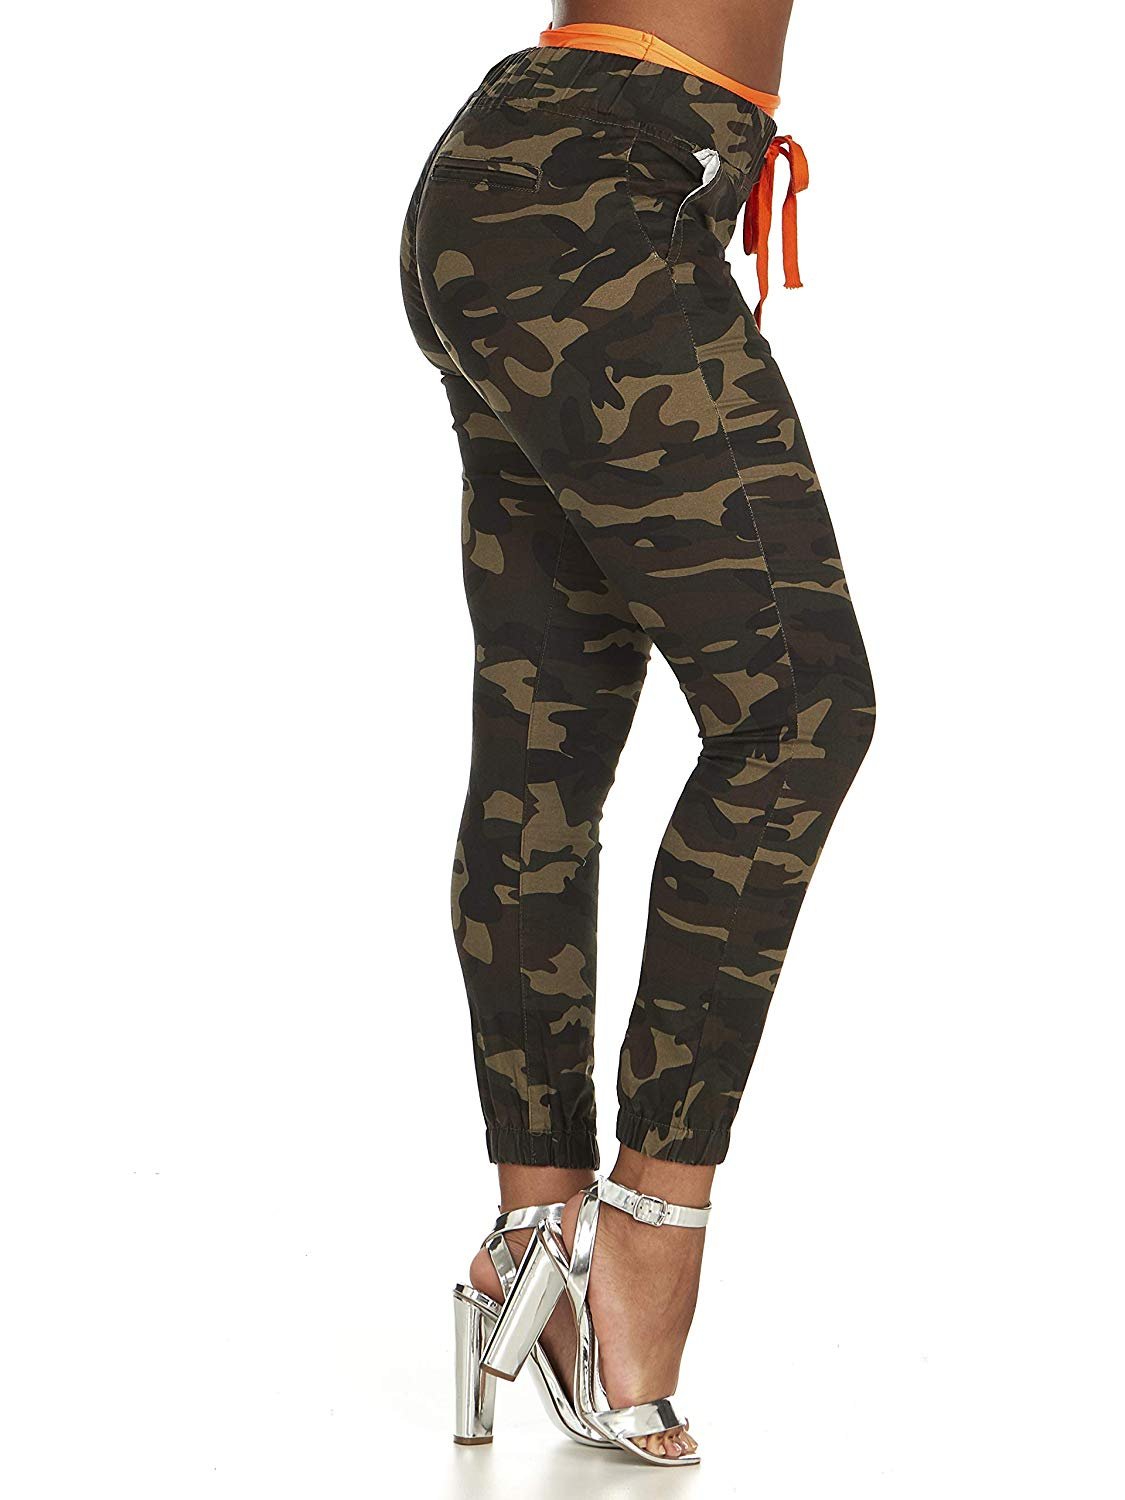 Classic Camo Skinny Jeans Joggers Drawstring Pants Teen Girlss Junior Size 9 - image 2 of 21